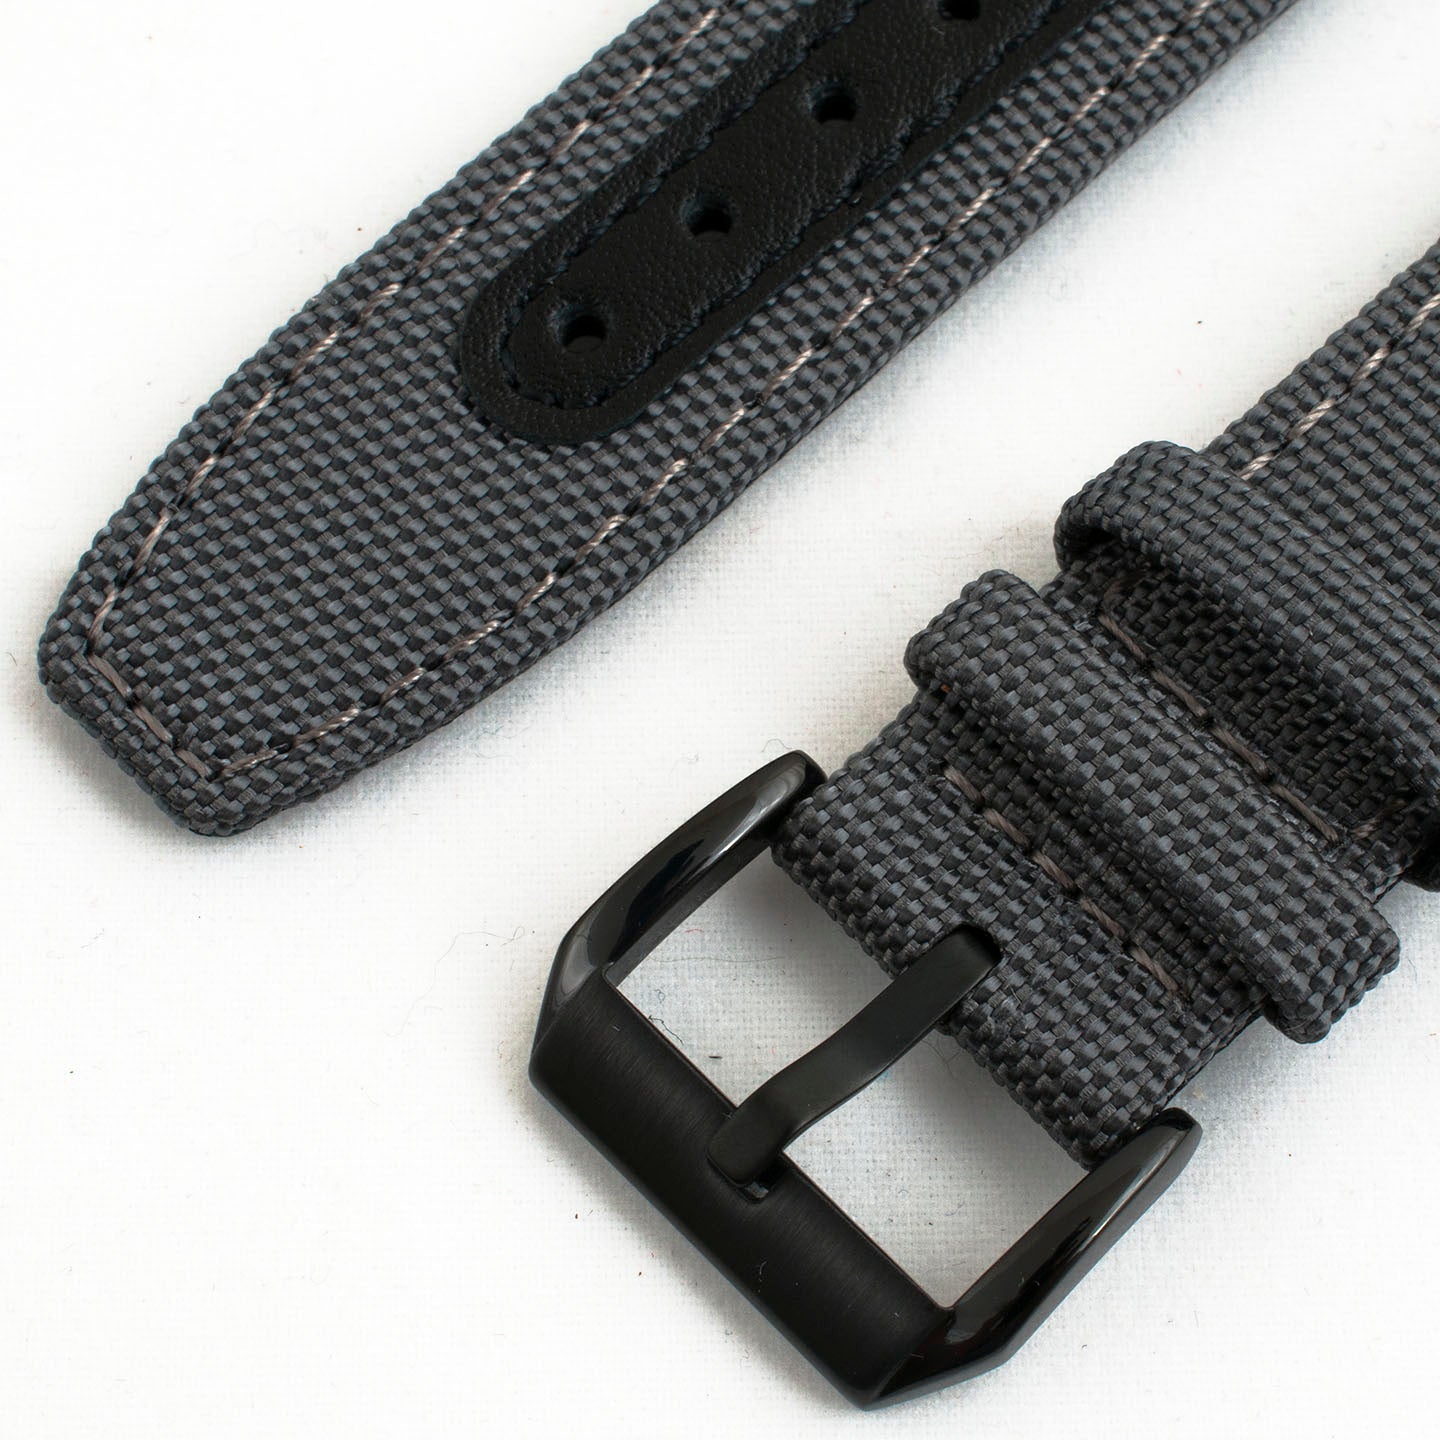 Premium Sailcloth quick release watch strap band replacement 19mm, 20mm, 21mm, 22mm gray grey with black buckle pvd